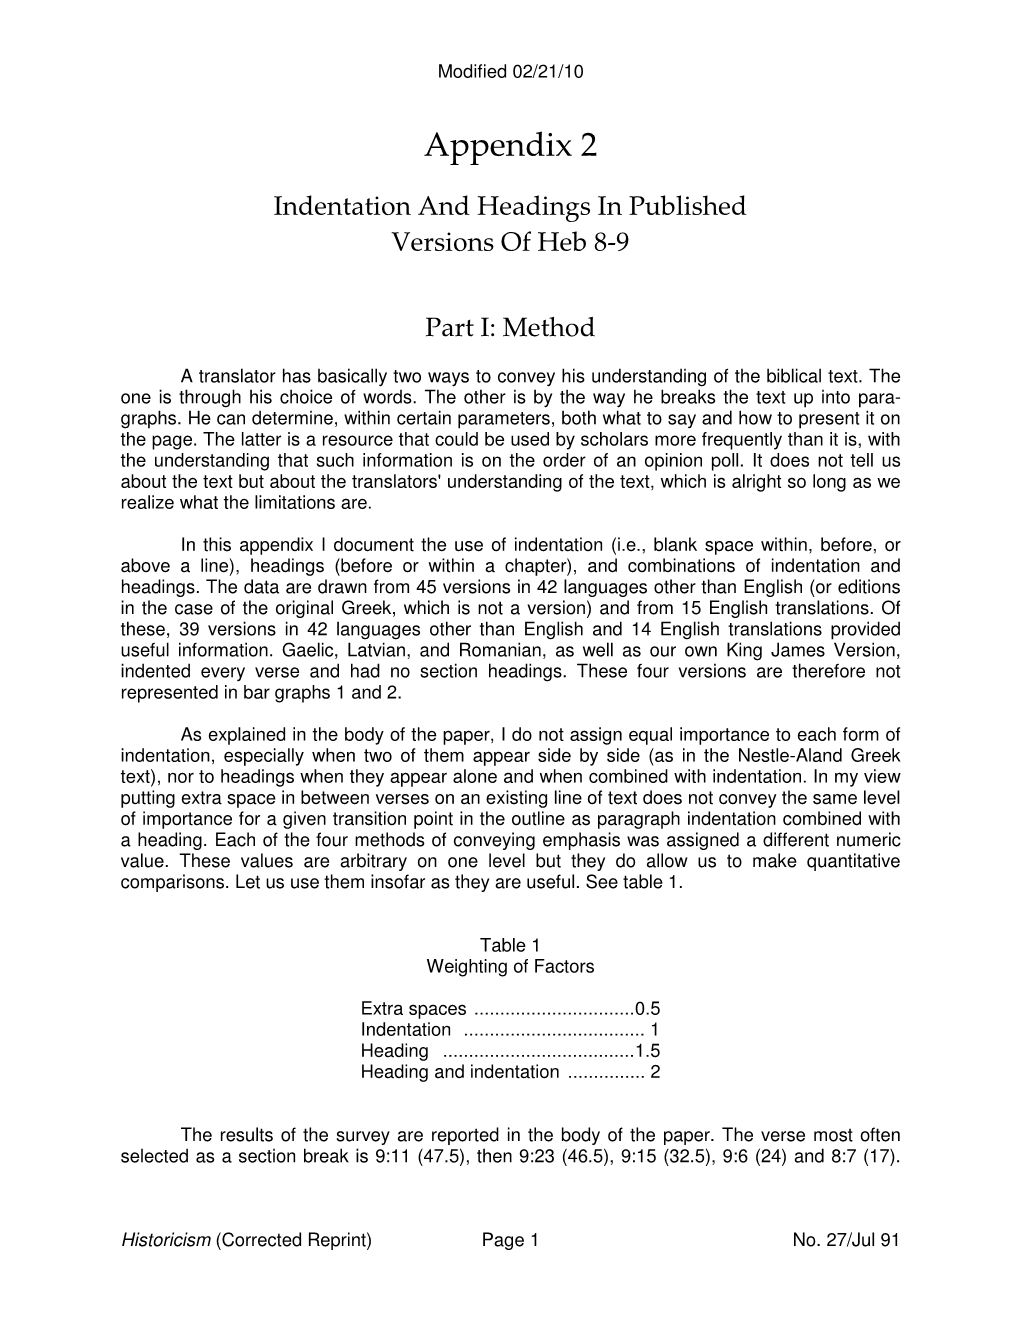 Appendix 2: Indentation and Headings in Published